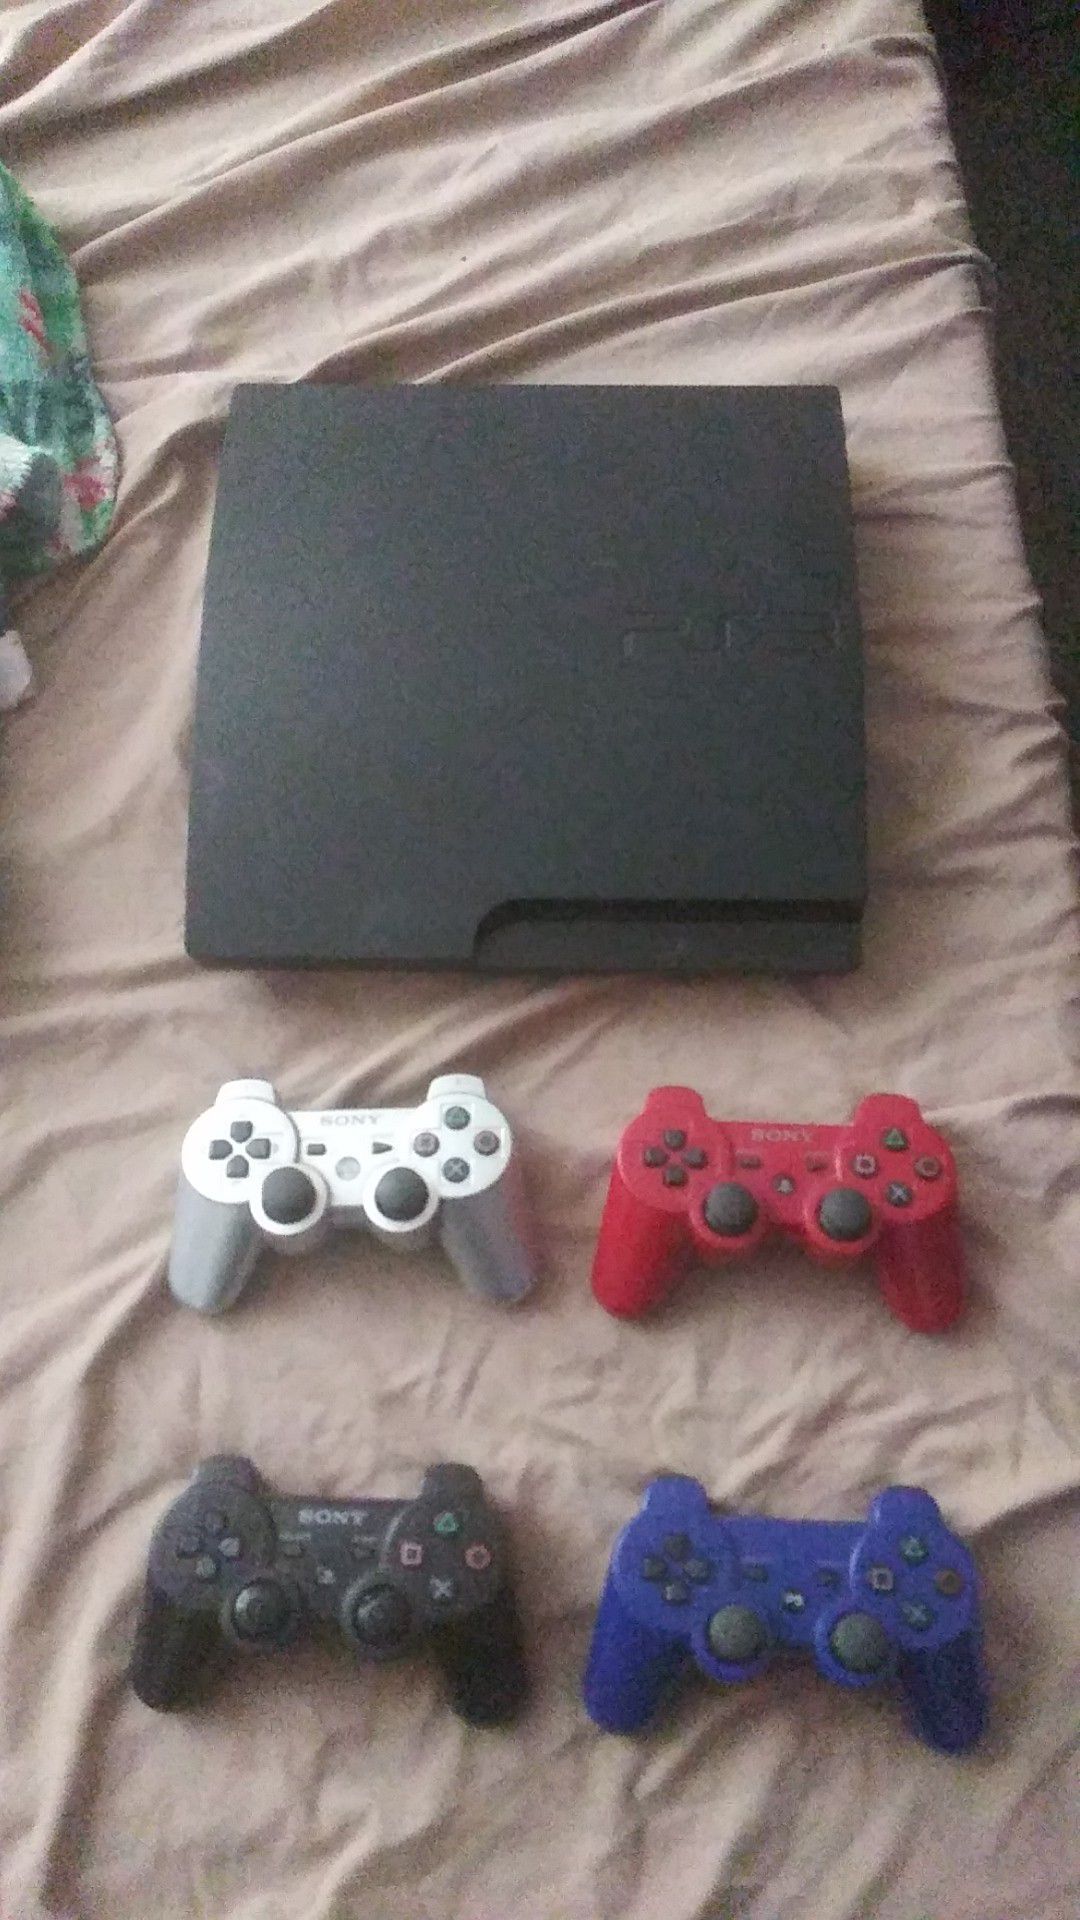 PS3 with 4controllers and 8games